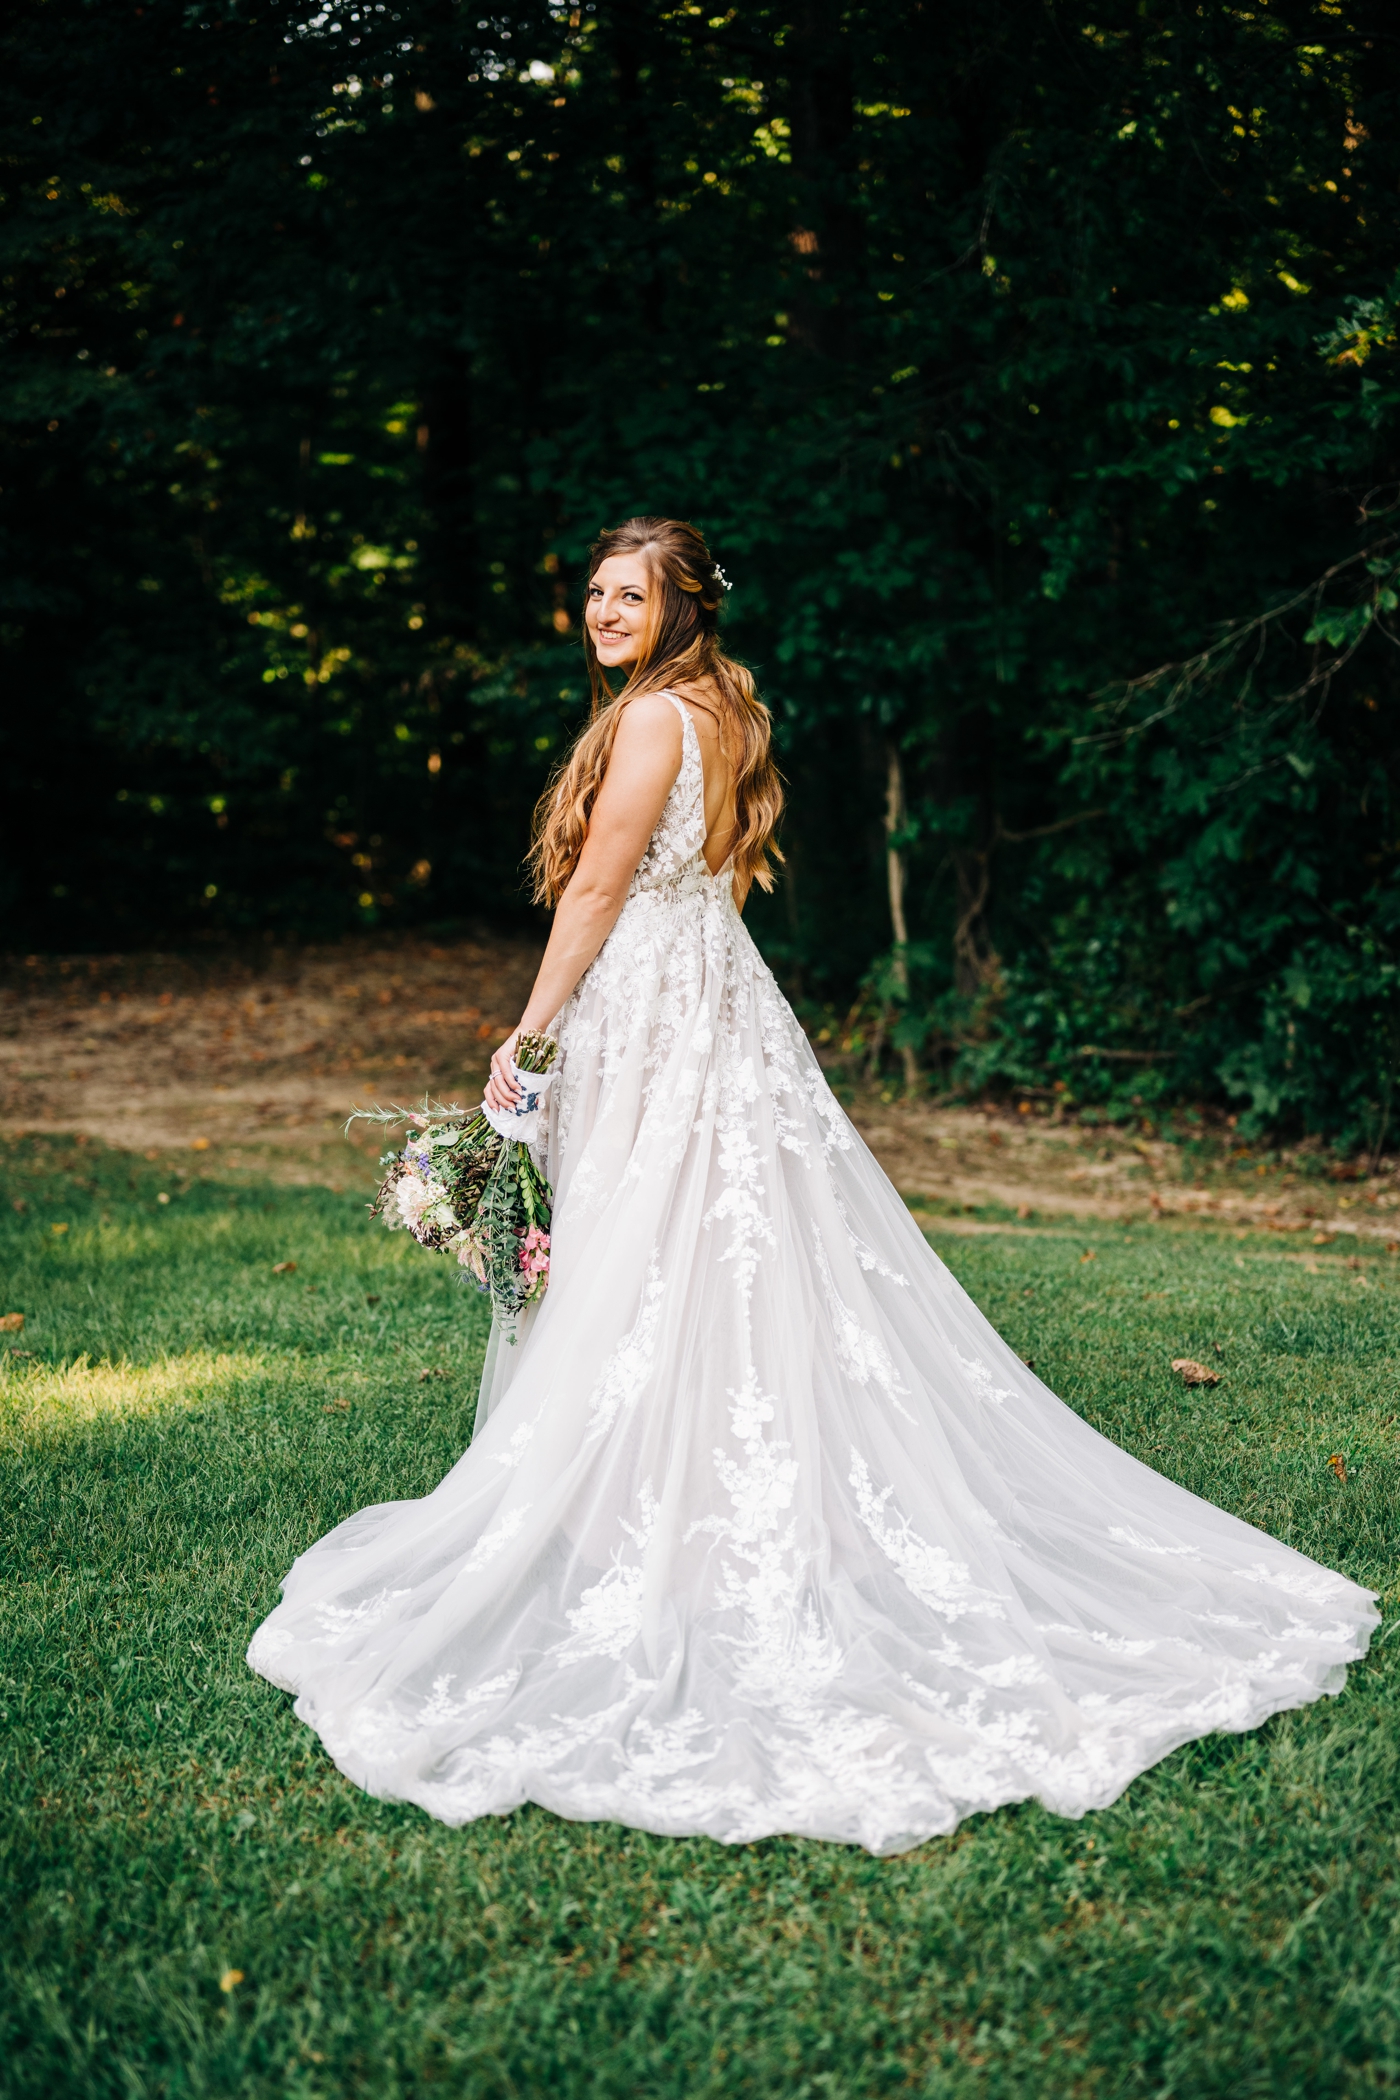 Bride wearing a-line wedding gown with lace details